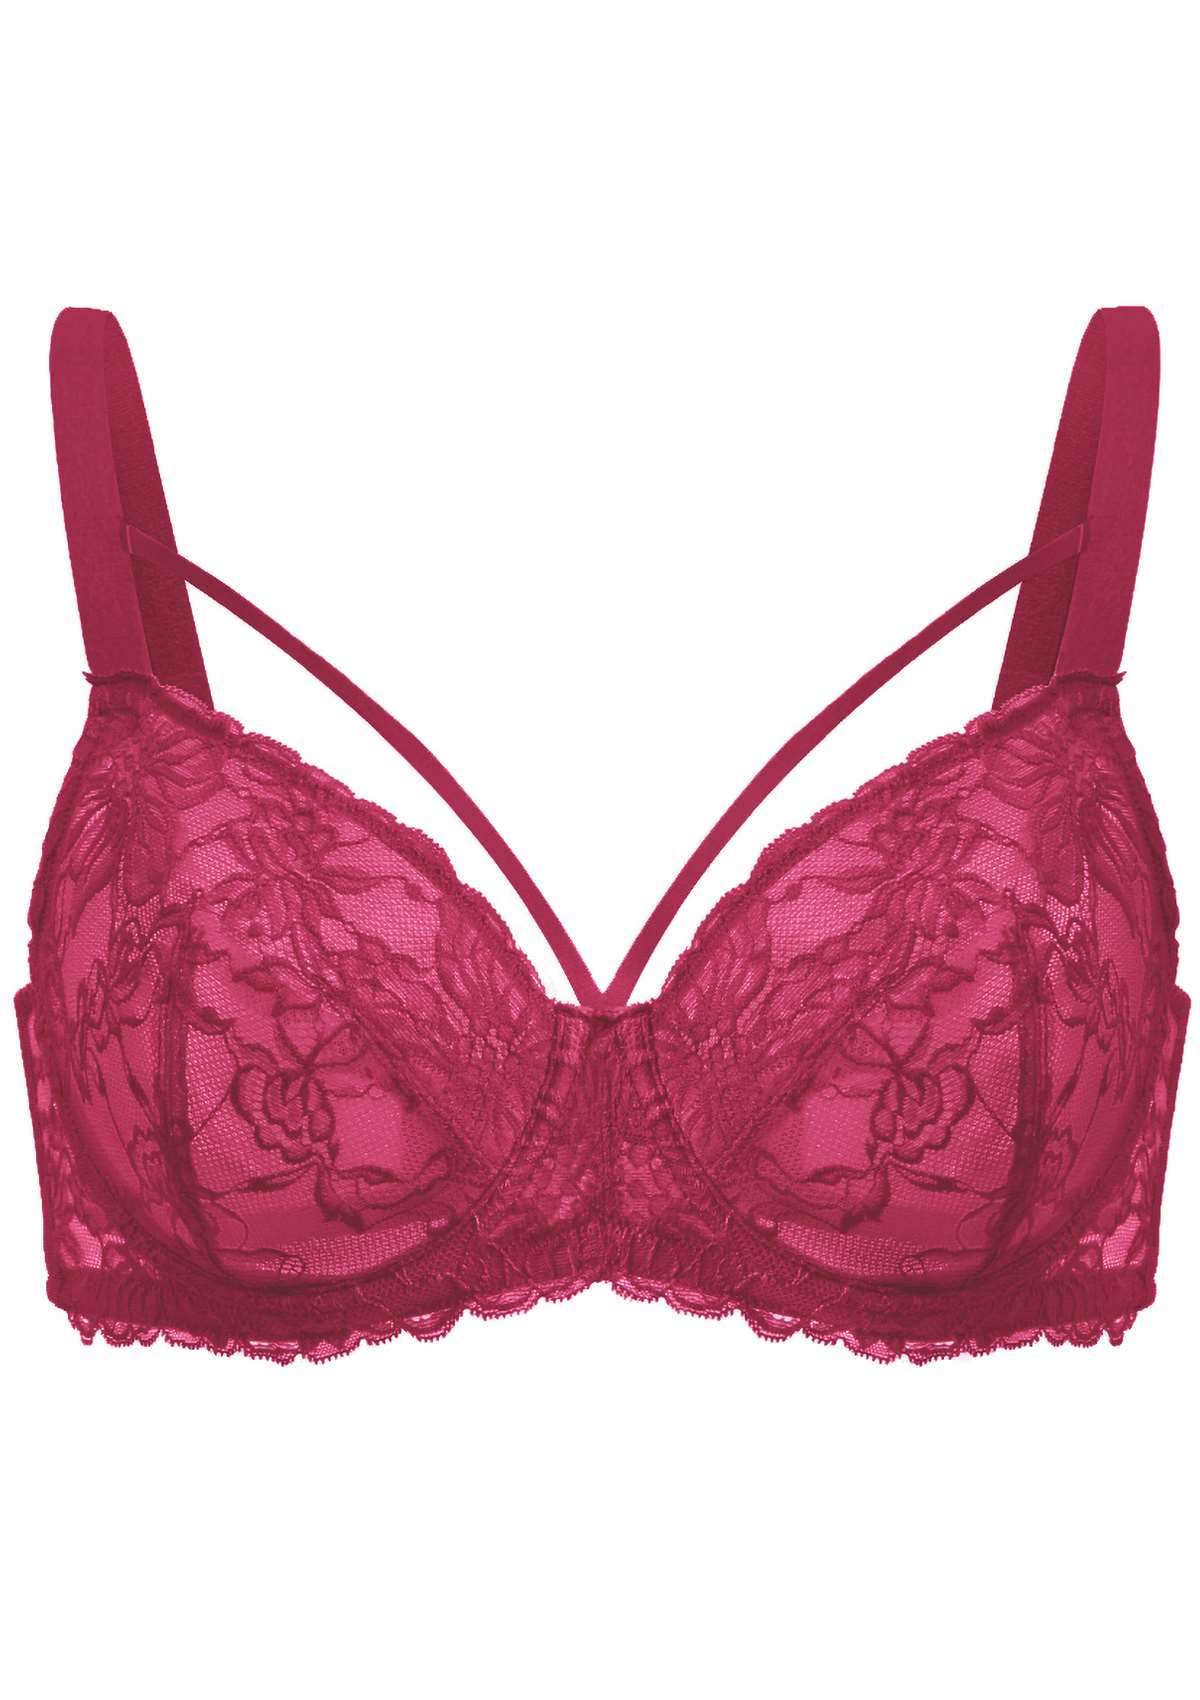 HSIA Pretty In Petals Sexy Lace Bra: Full Coverage Back Smoothing Bra - Red / 42 / DDD/F